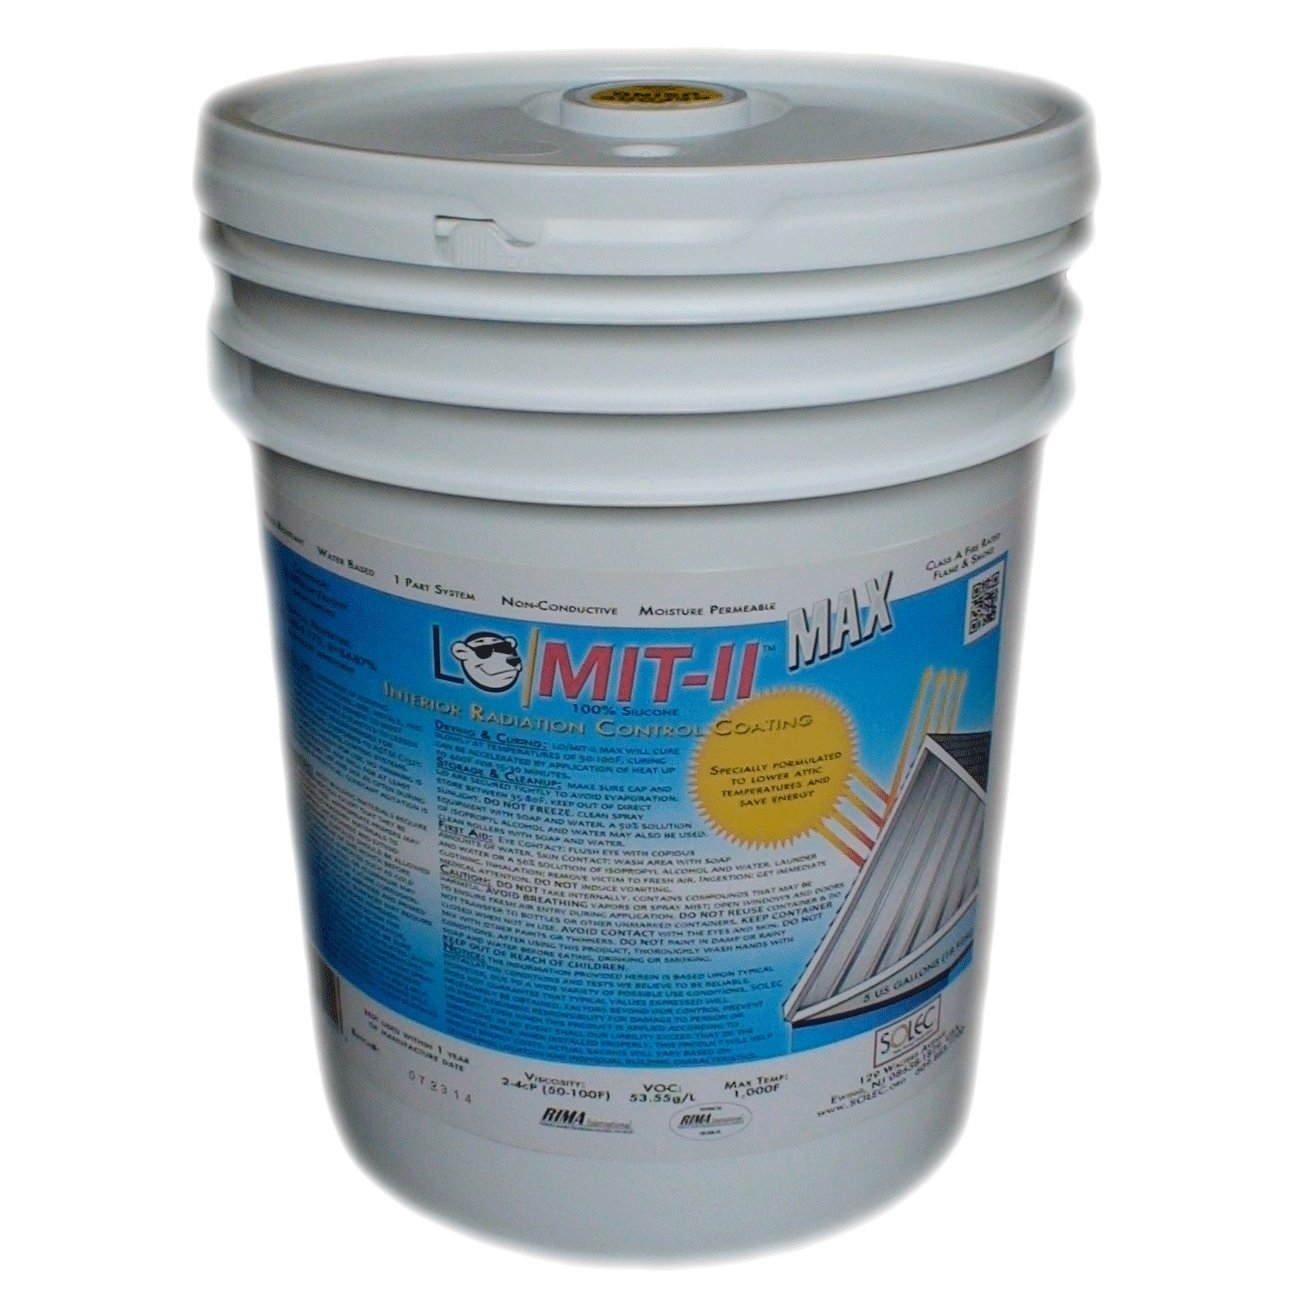 Radiant Barrier Coating MAX (5 Gal Pail)